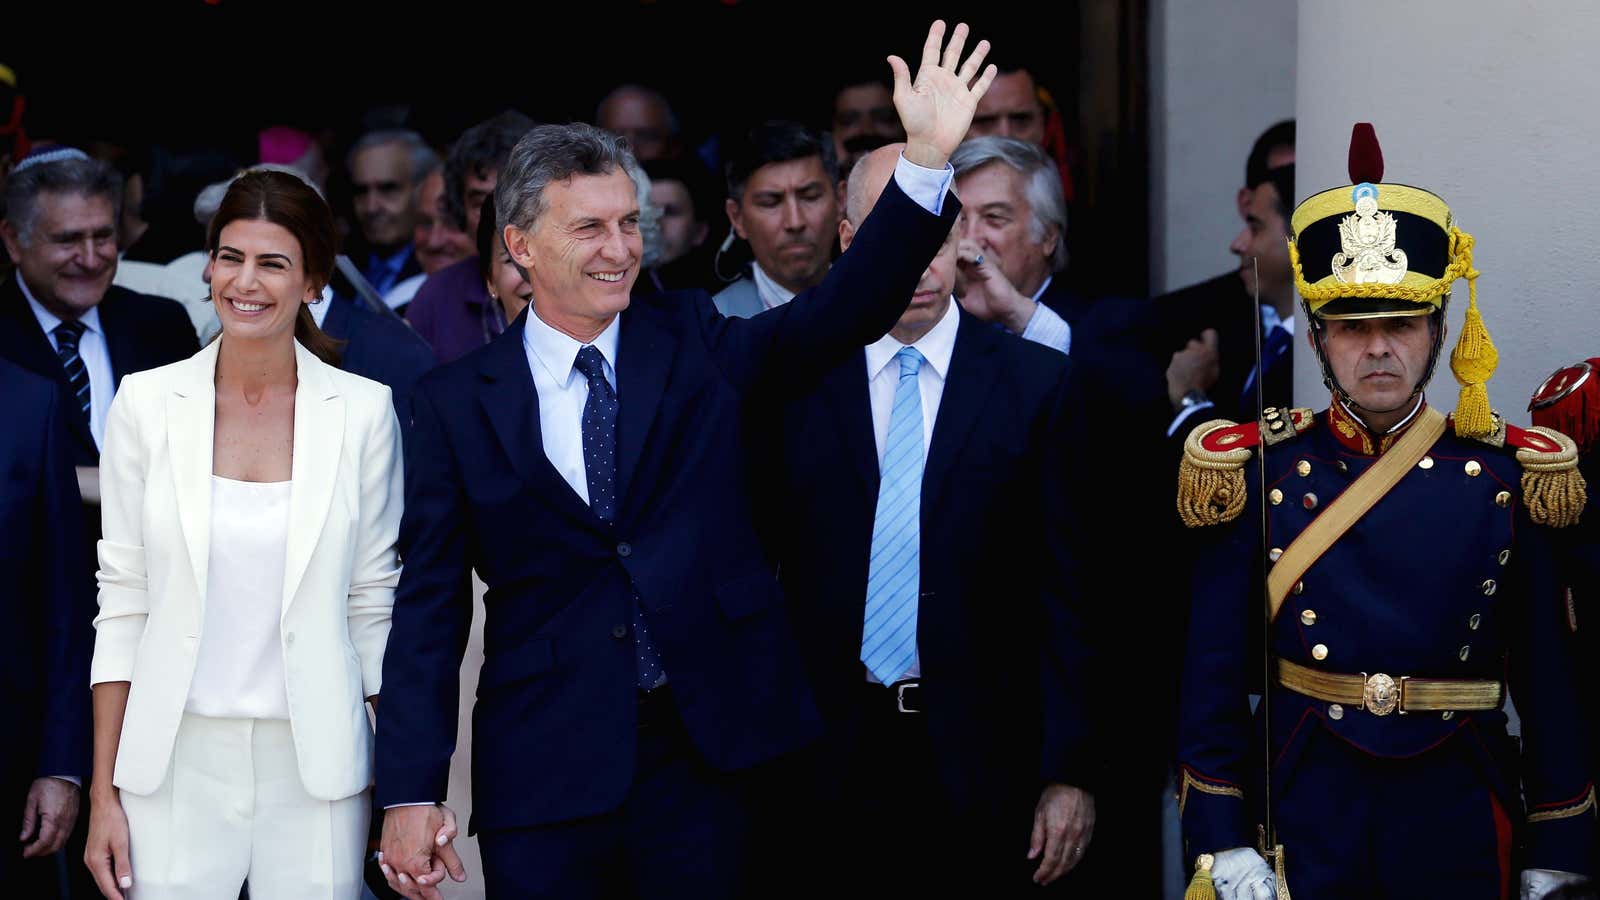 Argentina’s new president, Mauricio Macri, waves alongside first lady Juliana Awada (L) outside Buenos Aires’s main cathedral on Dec. 11, 2015.